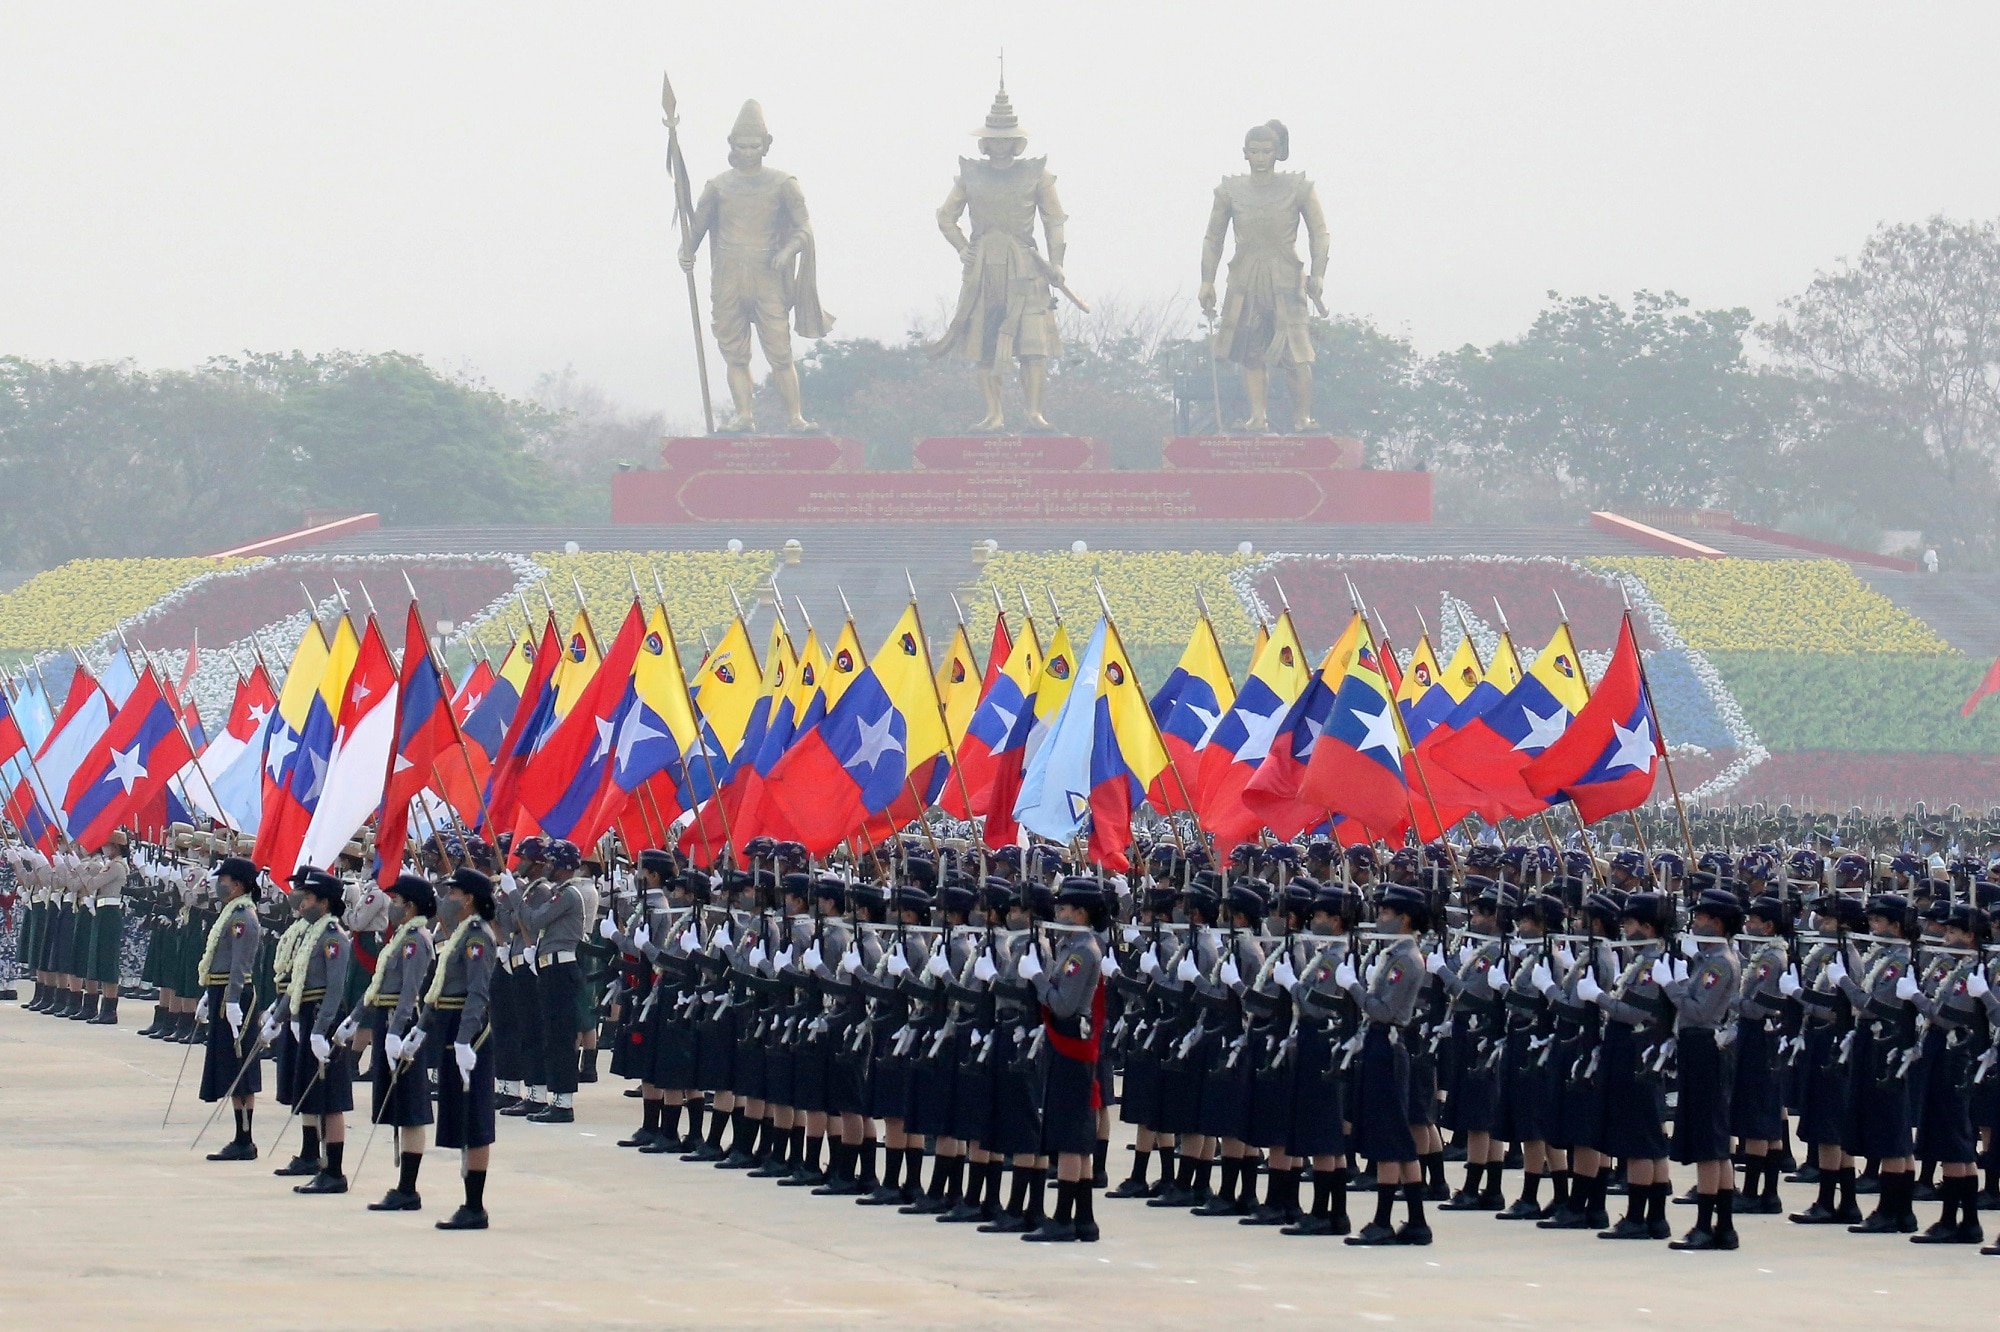 Military personnel participate in a parade on Armed Forces Day in Naypyitaw, Myanmar.